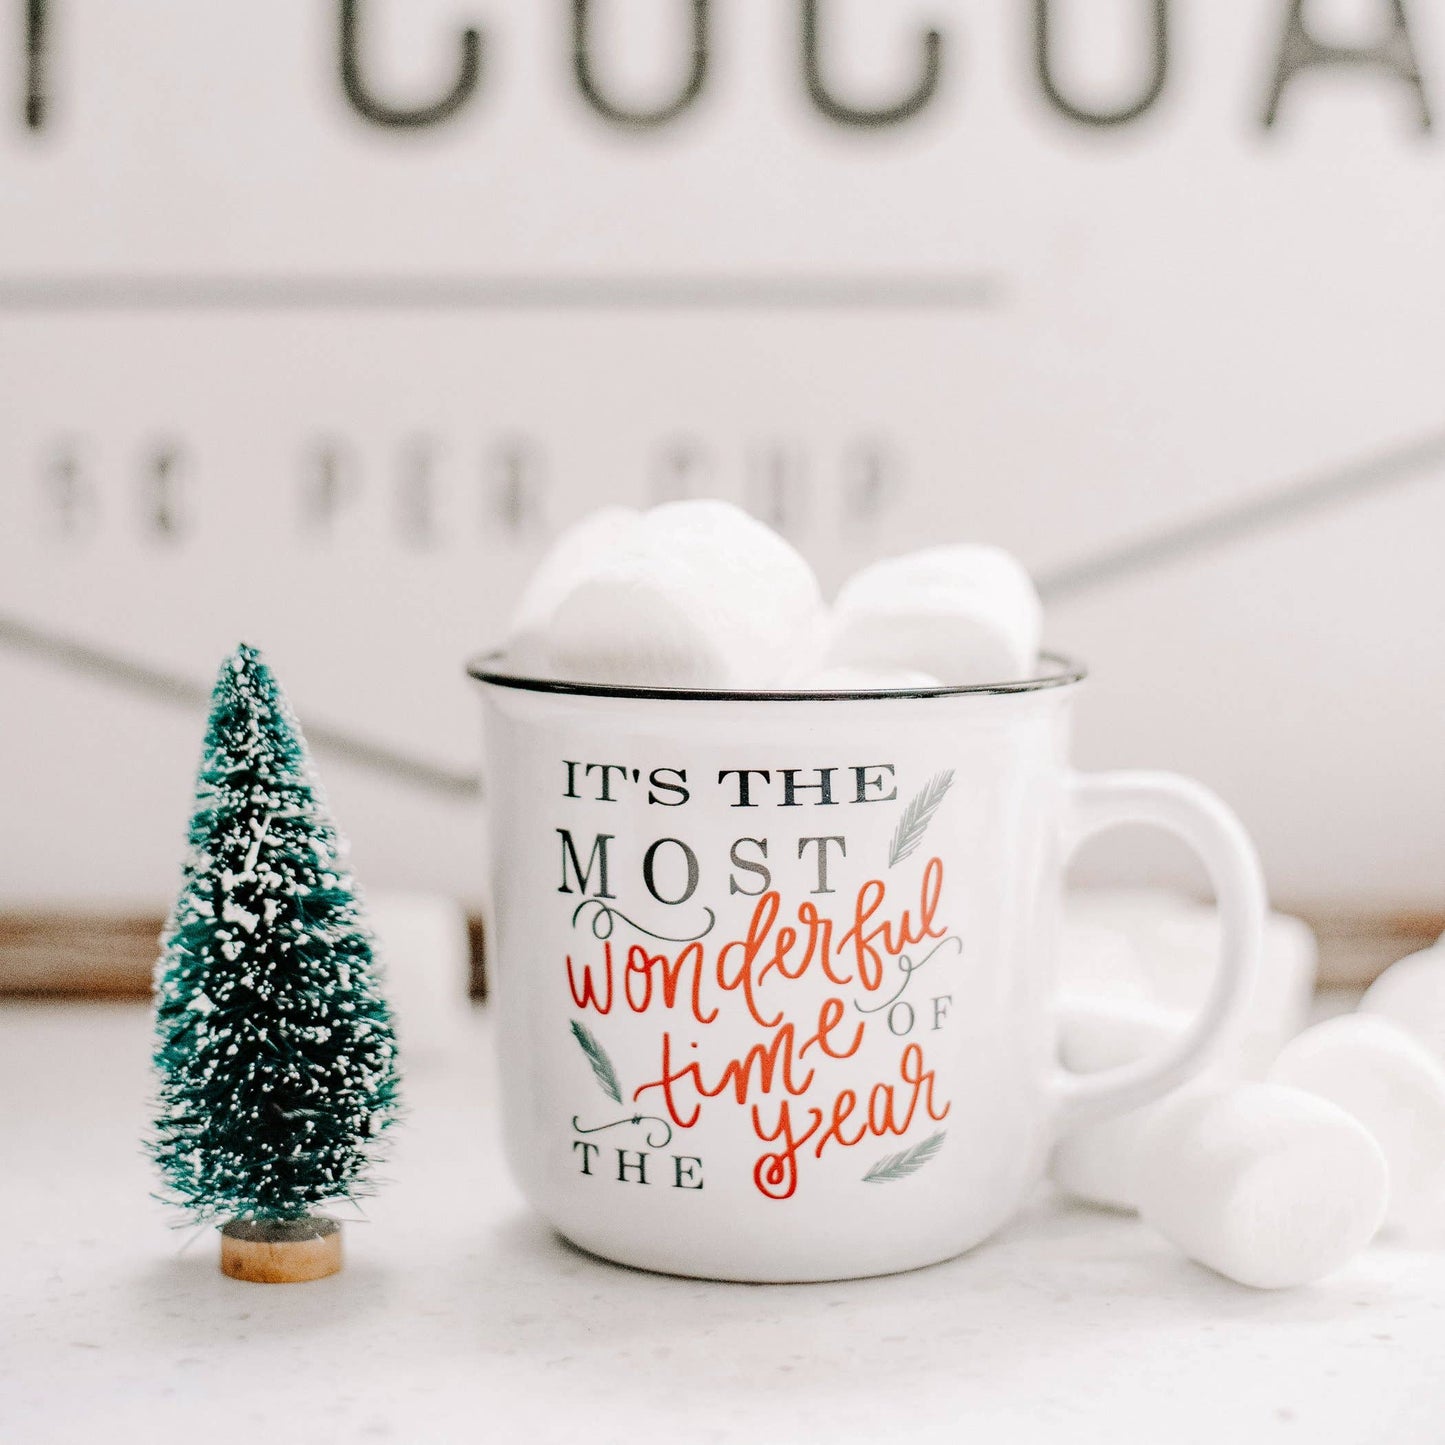 It's The Most Wonderful Time of The Year Campfire Mug